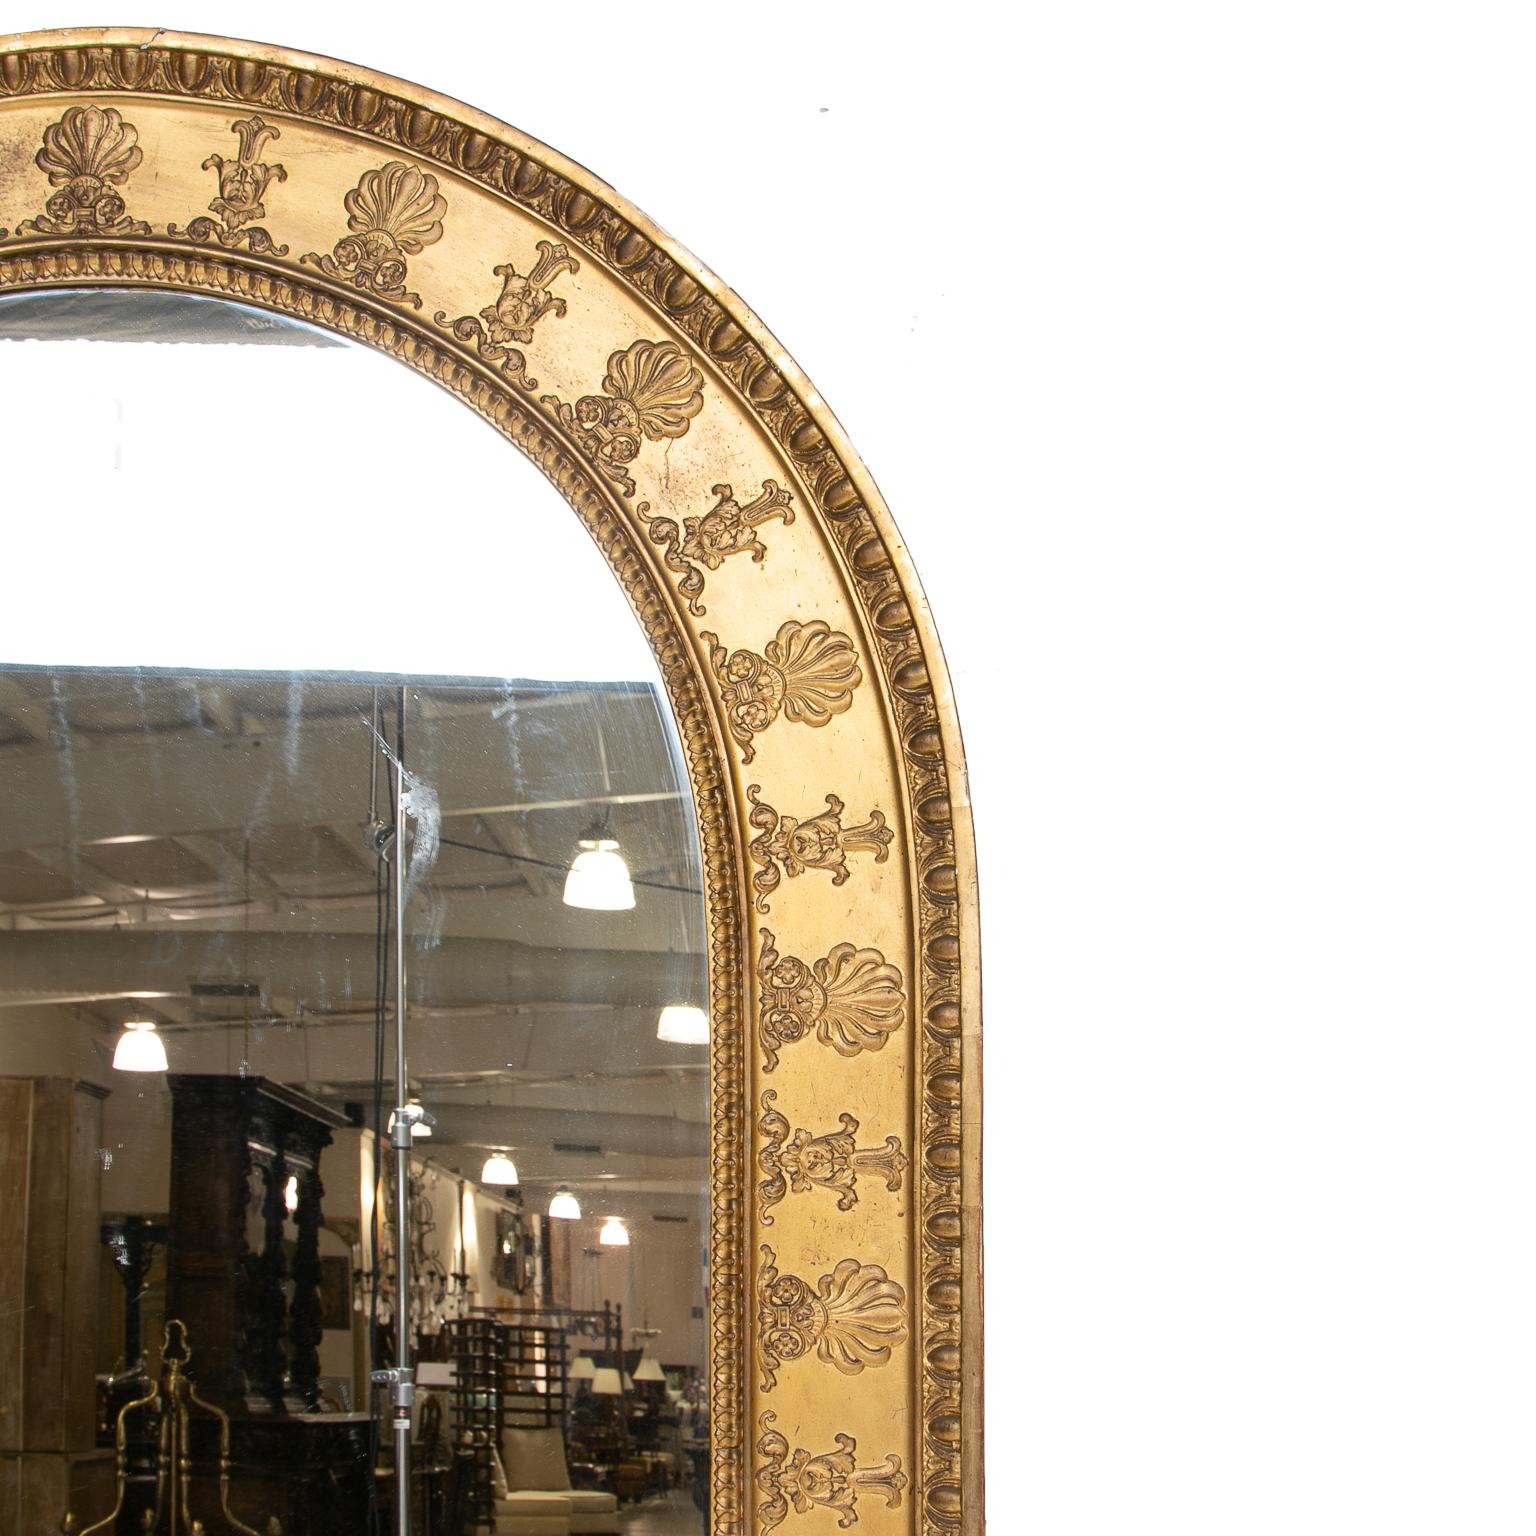 19th century English dome top gilt mirror

Great sized mirror. Giltwood with palmette and bellflower detail strong ornament outer trim. Detailed but a simple look overall.
  